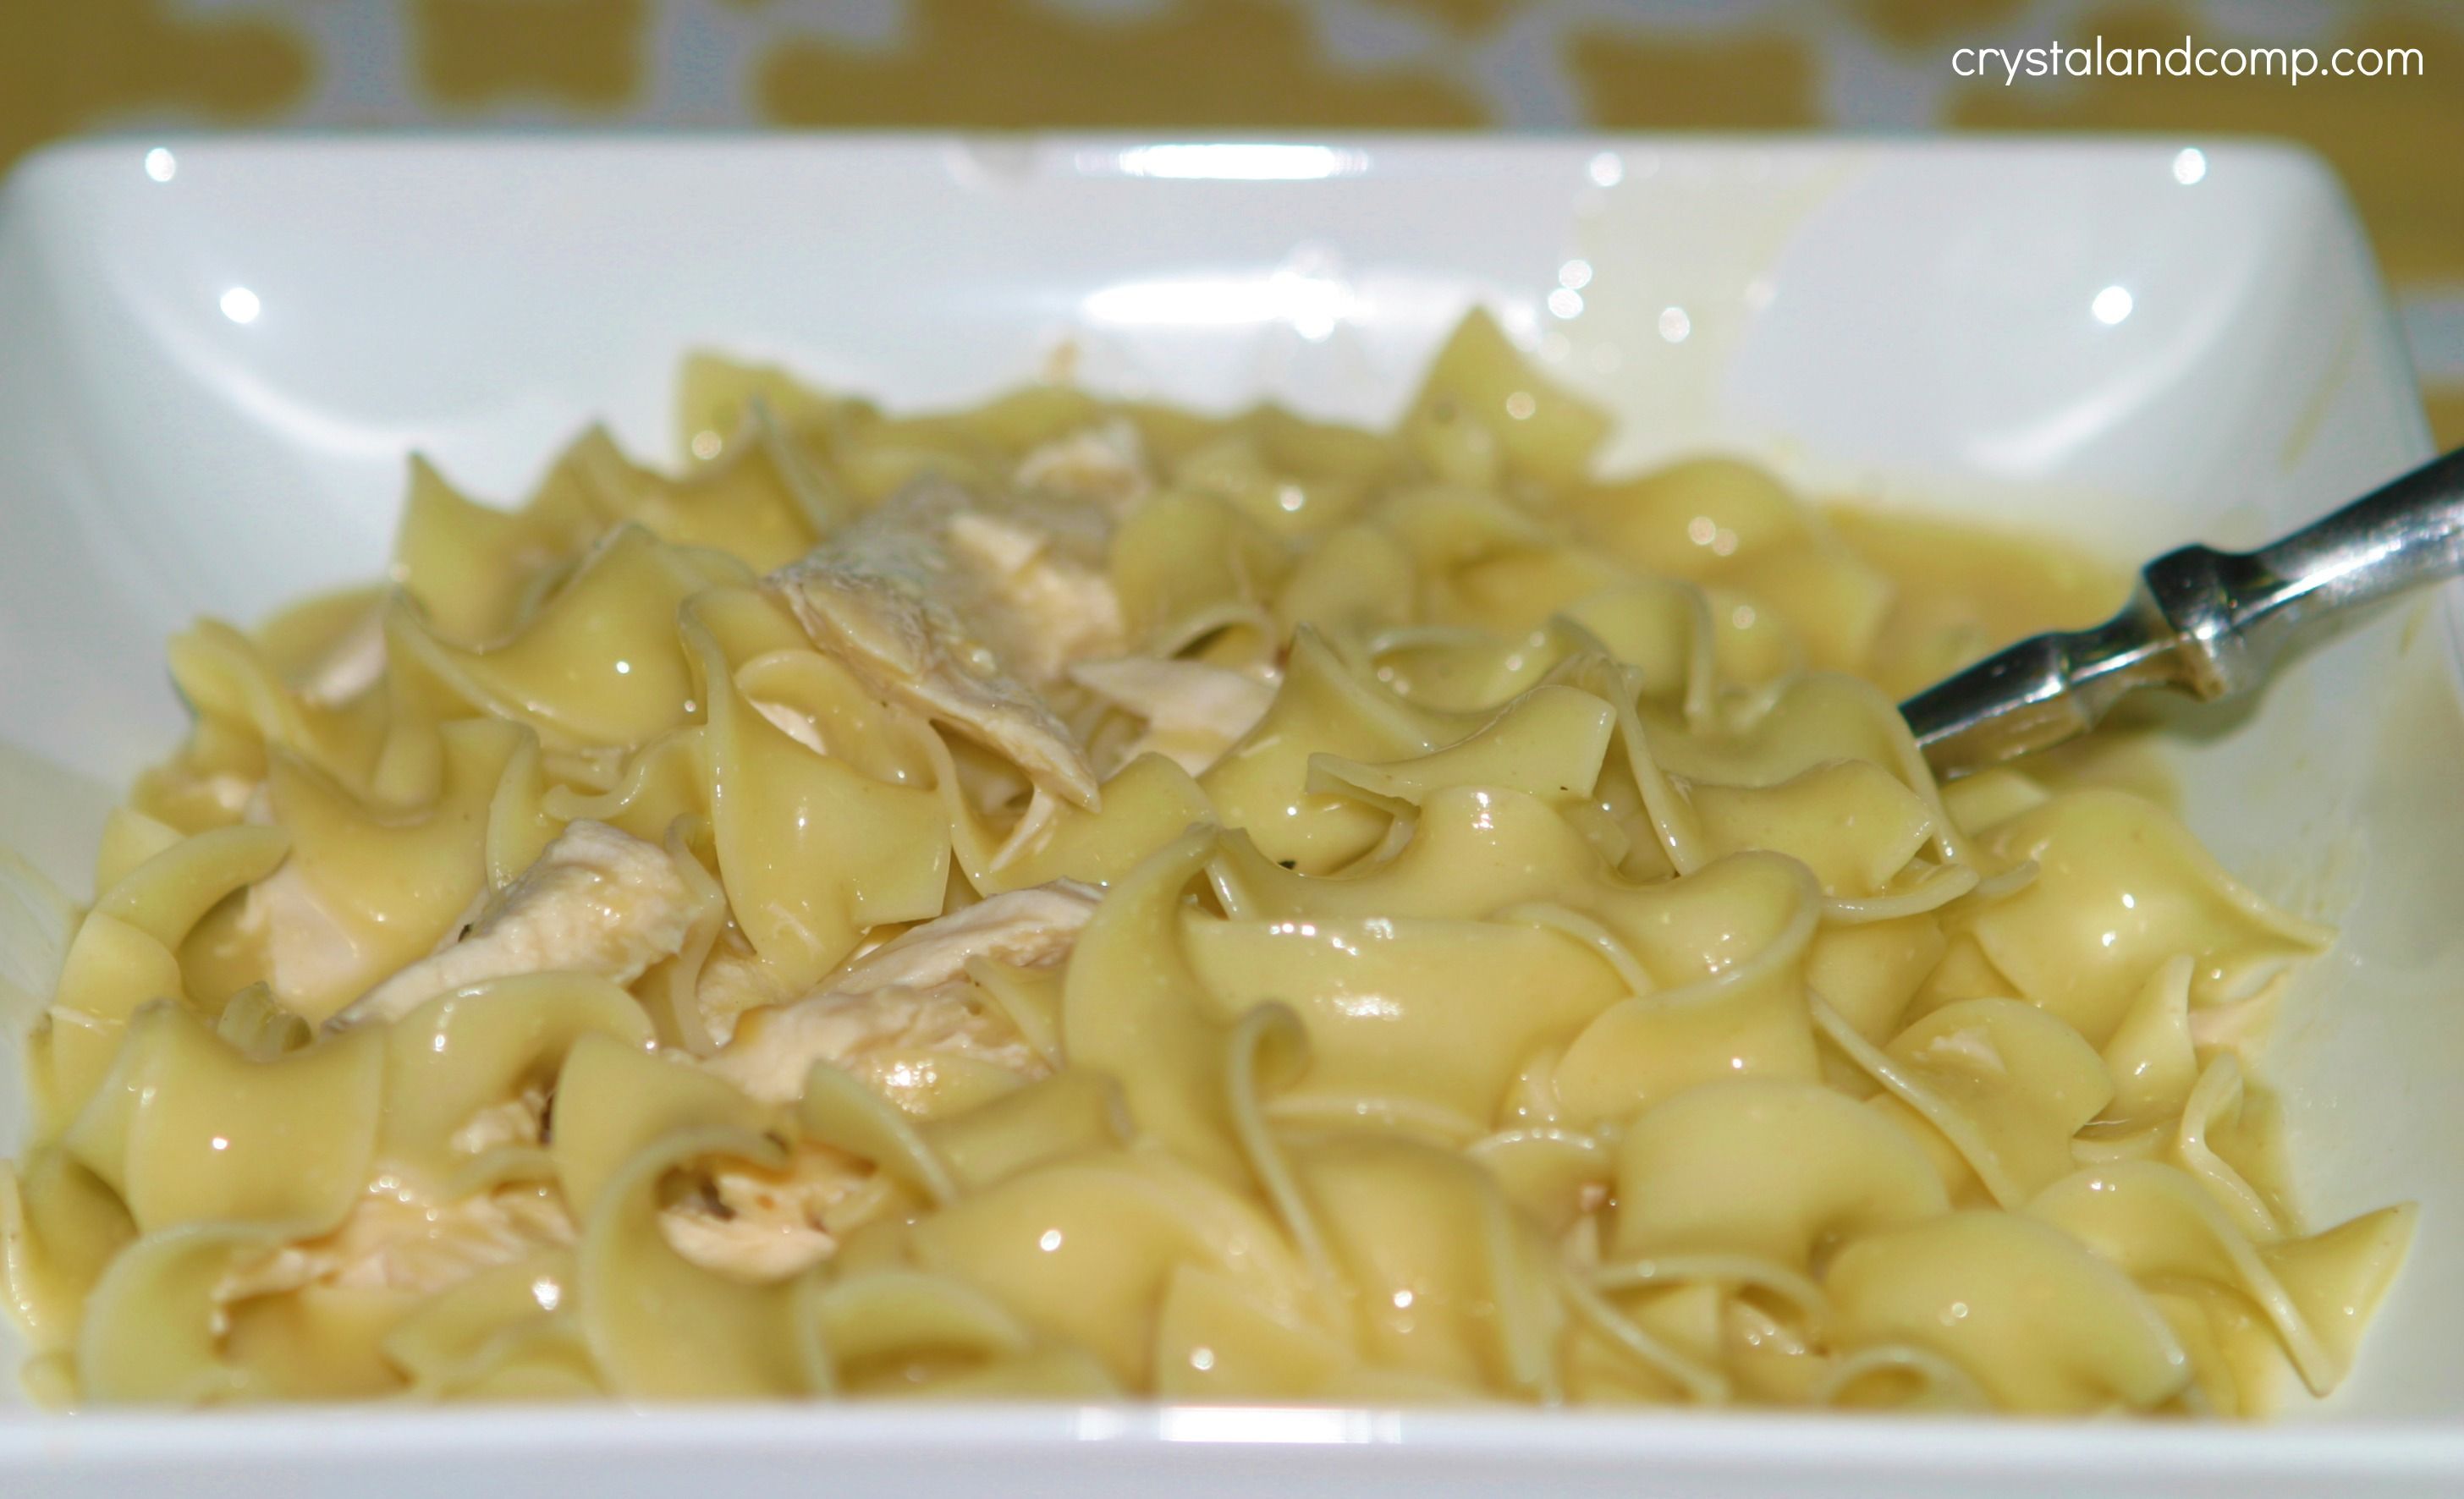 crockpot chicken and noodles Ingredients 4-6 chicken breasts 1 bag egg noodles 2 (10 oz) cans cream of chicken 14-15 oz can